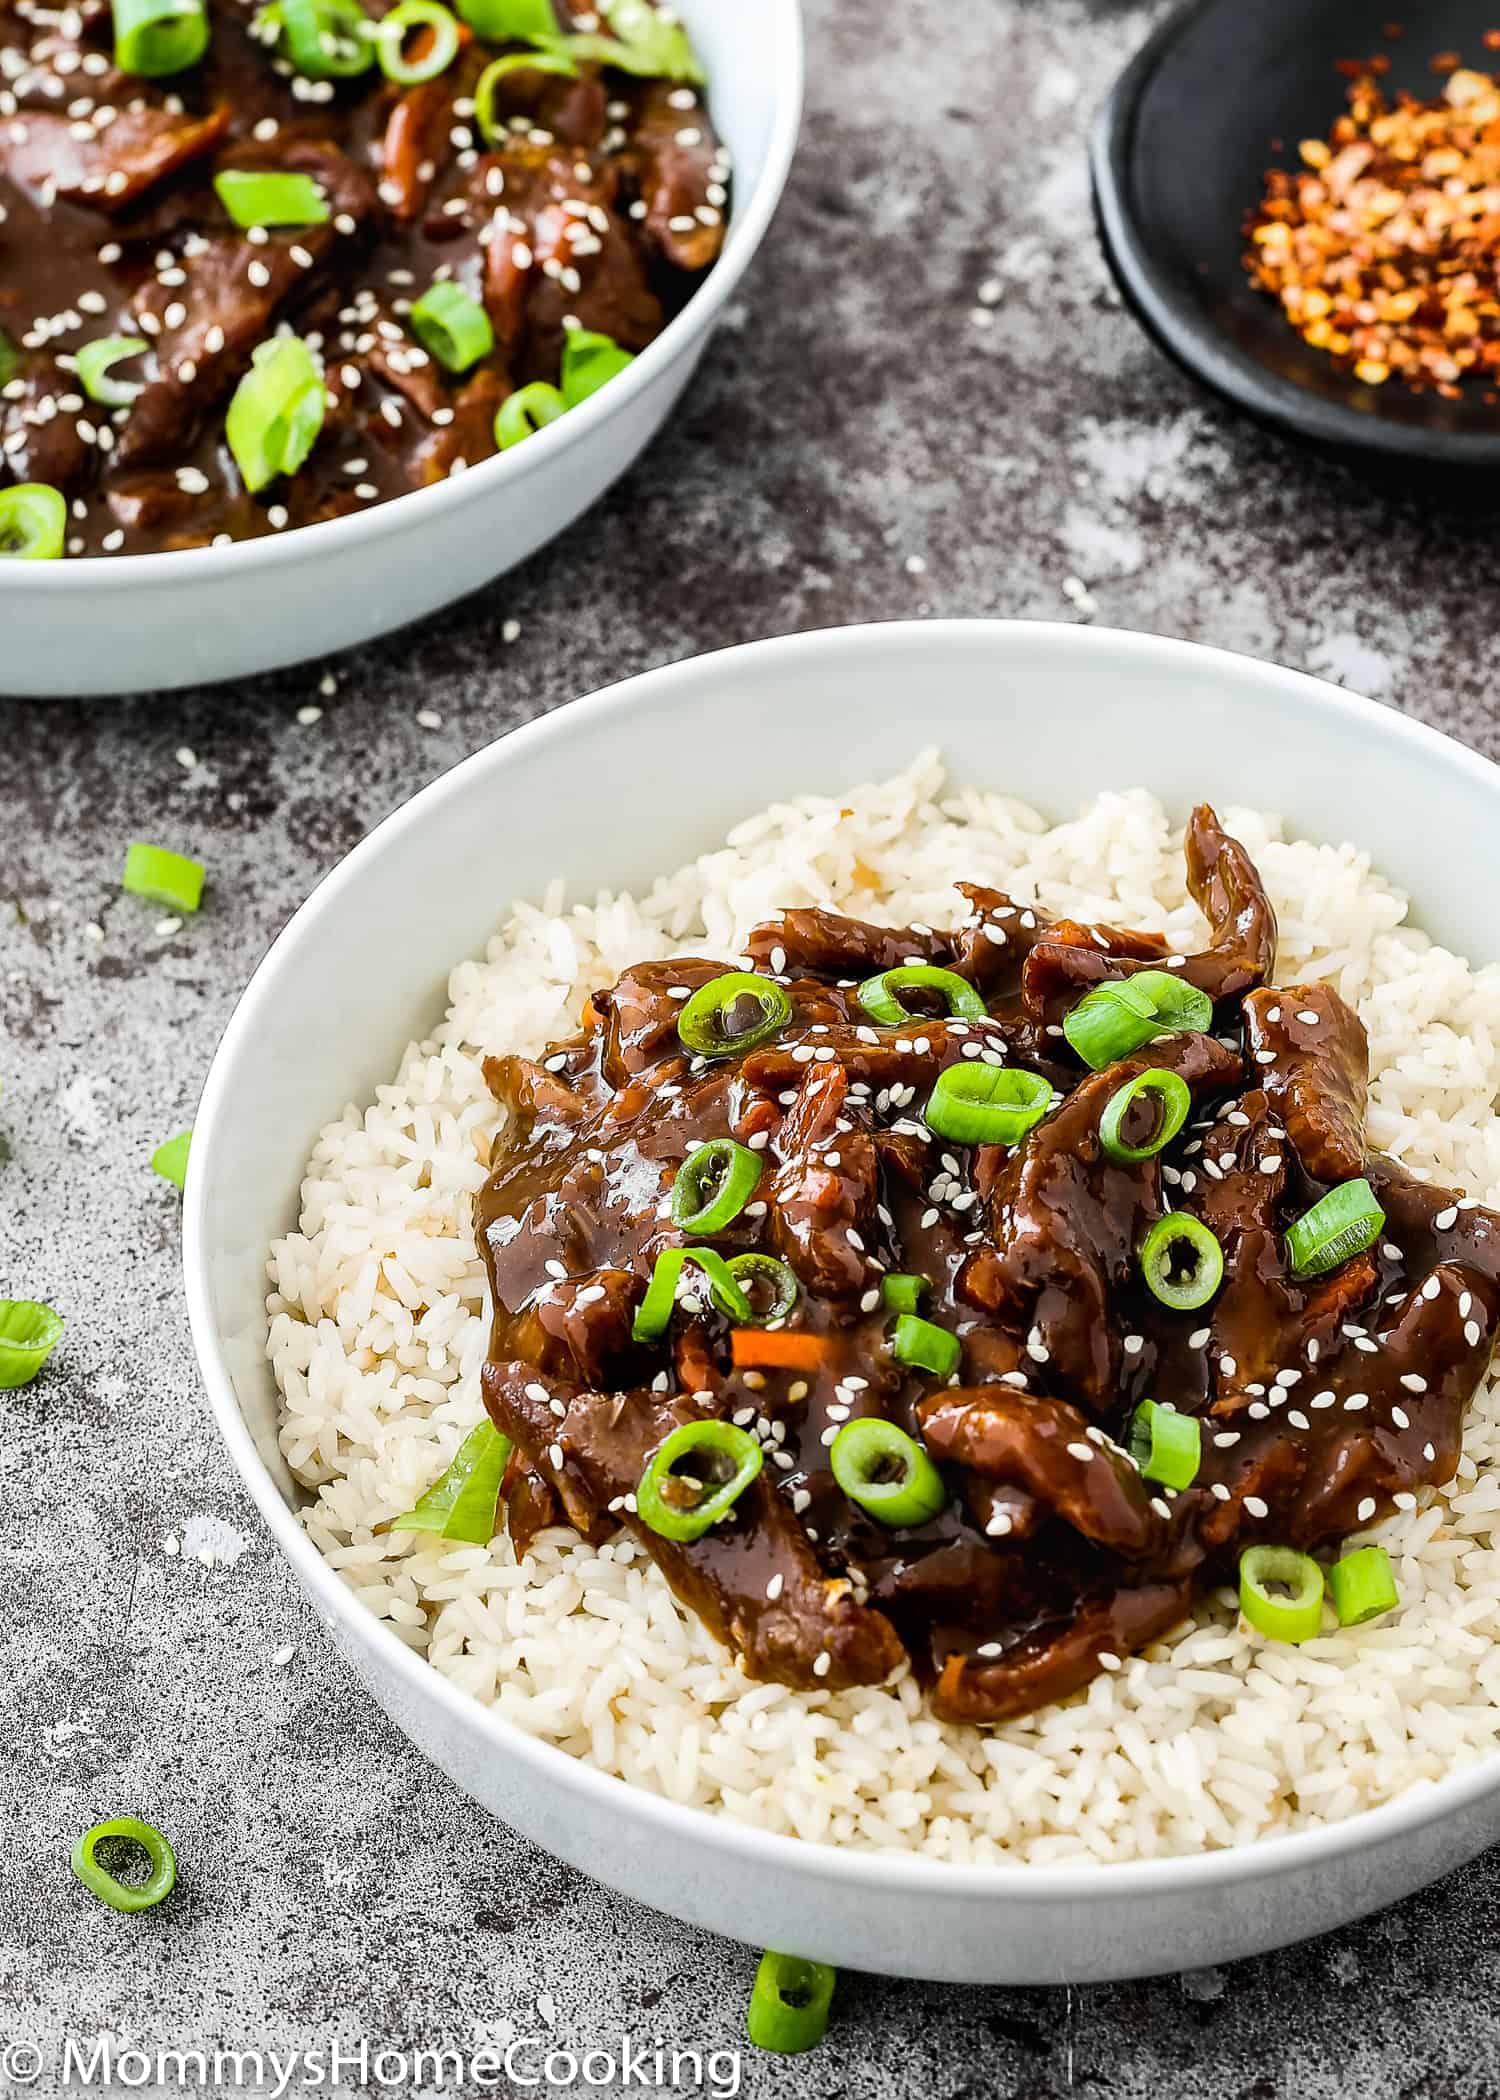 This Easy Instant Pot Mongolian Beef recipe is full of all the flavors you love from your favorite Chinese restaurant. Tender beef smothered in a super tasty sauce that is ready in 30 minutes or less. https://mommyshomecooking.com